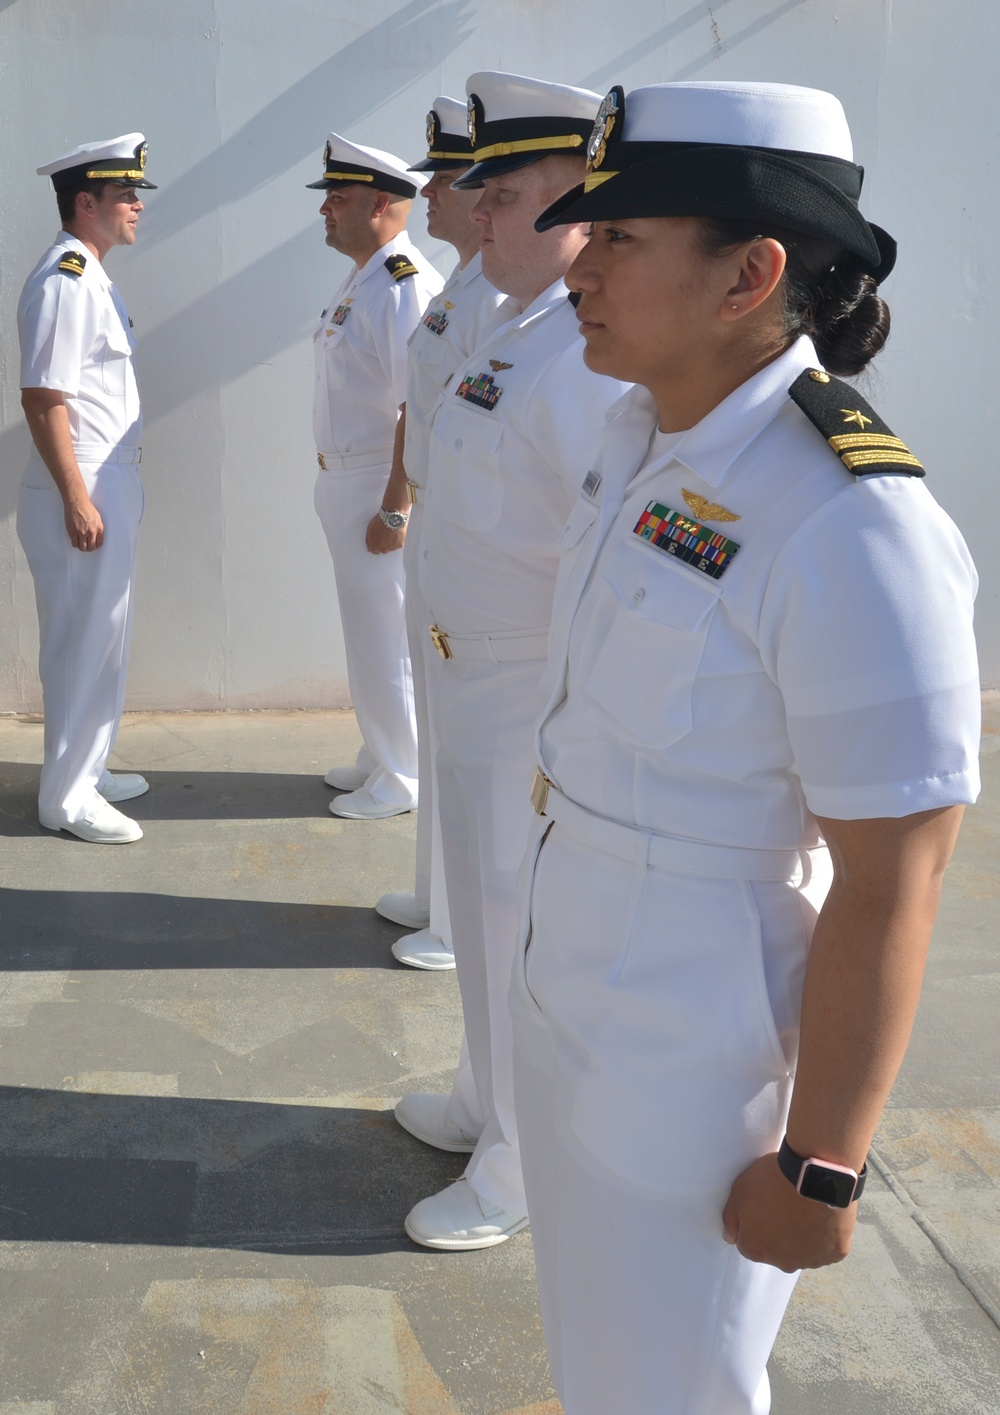 Sailors Conduct Inspection